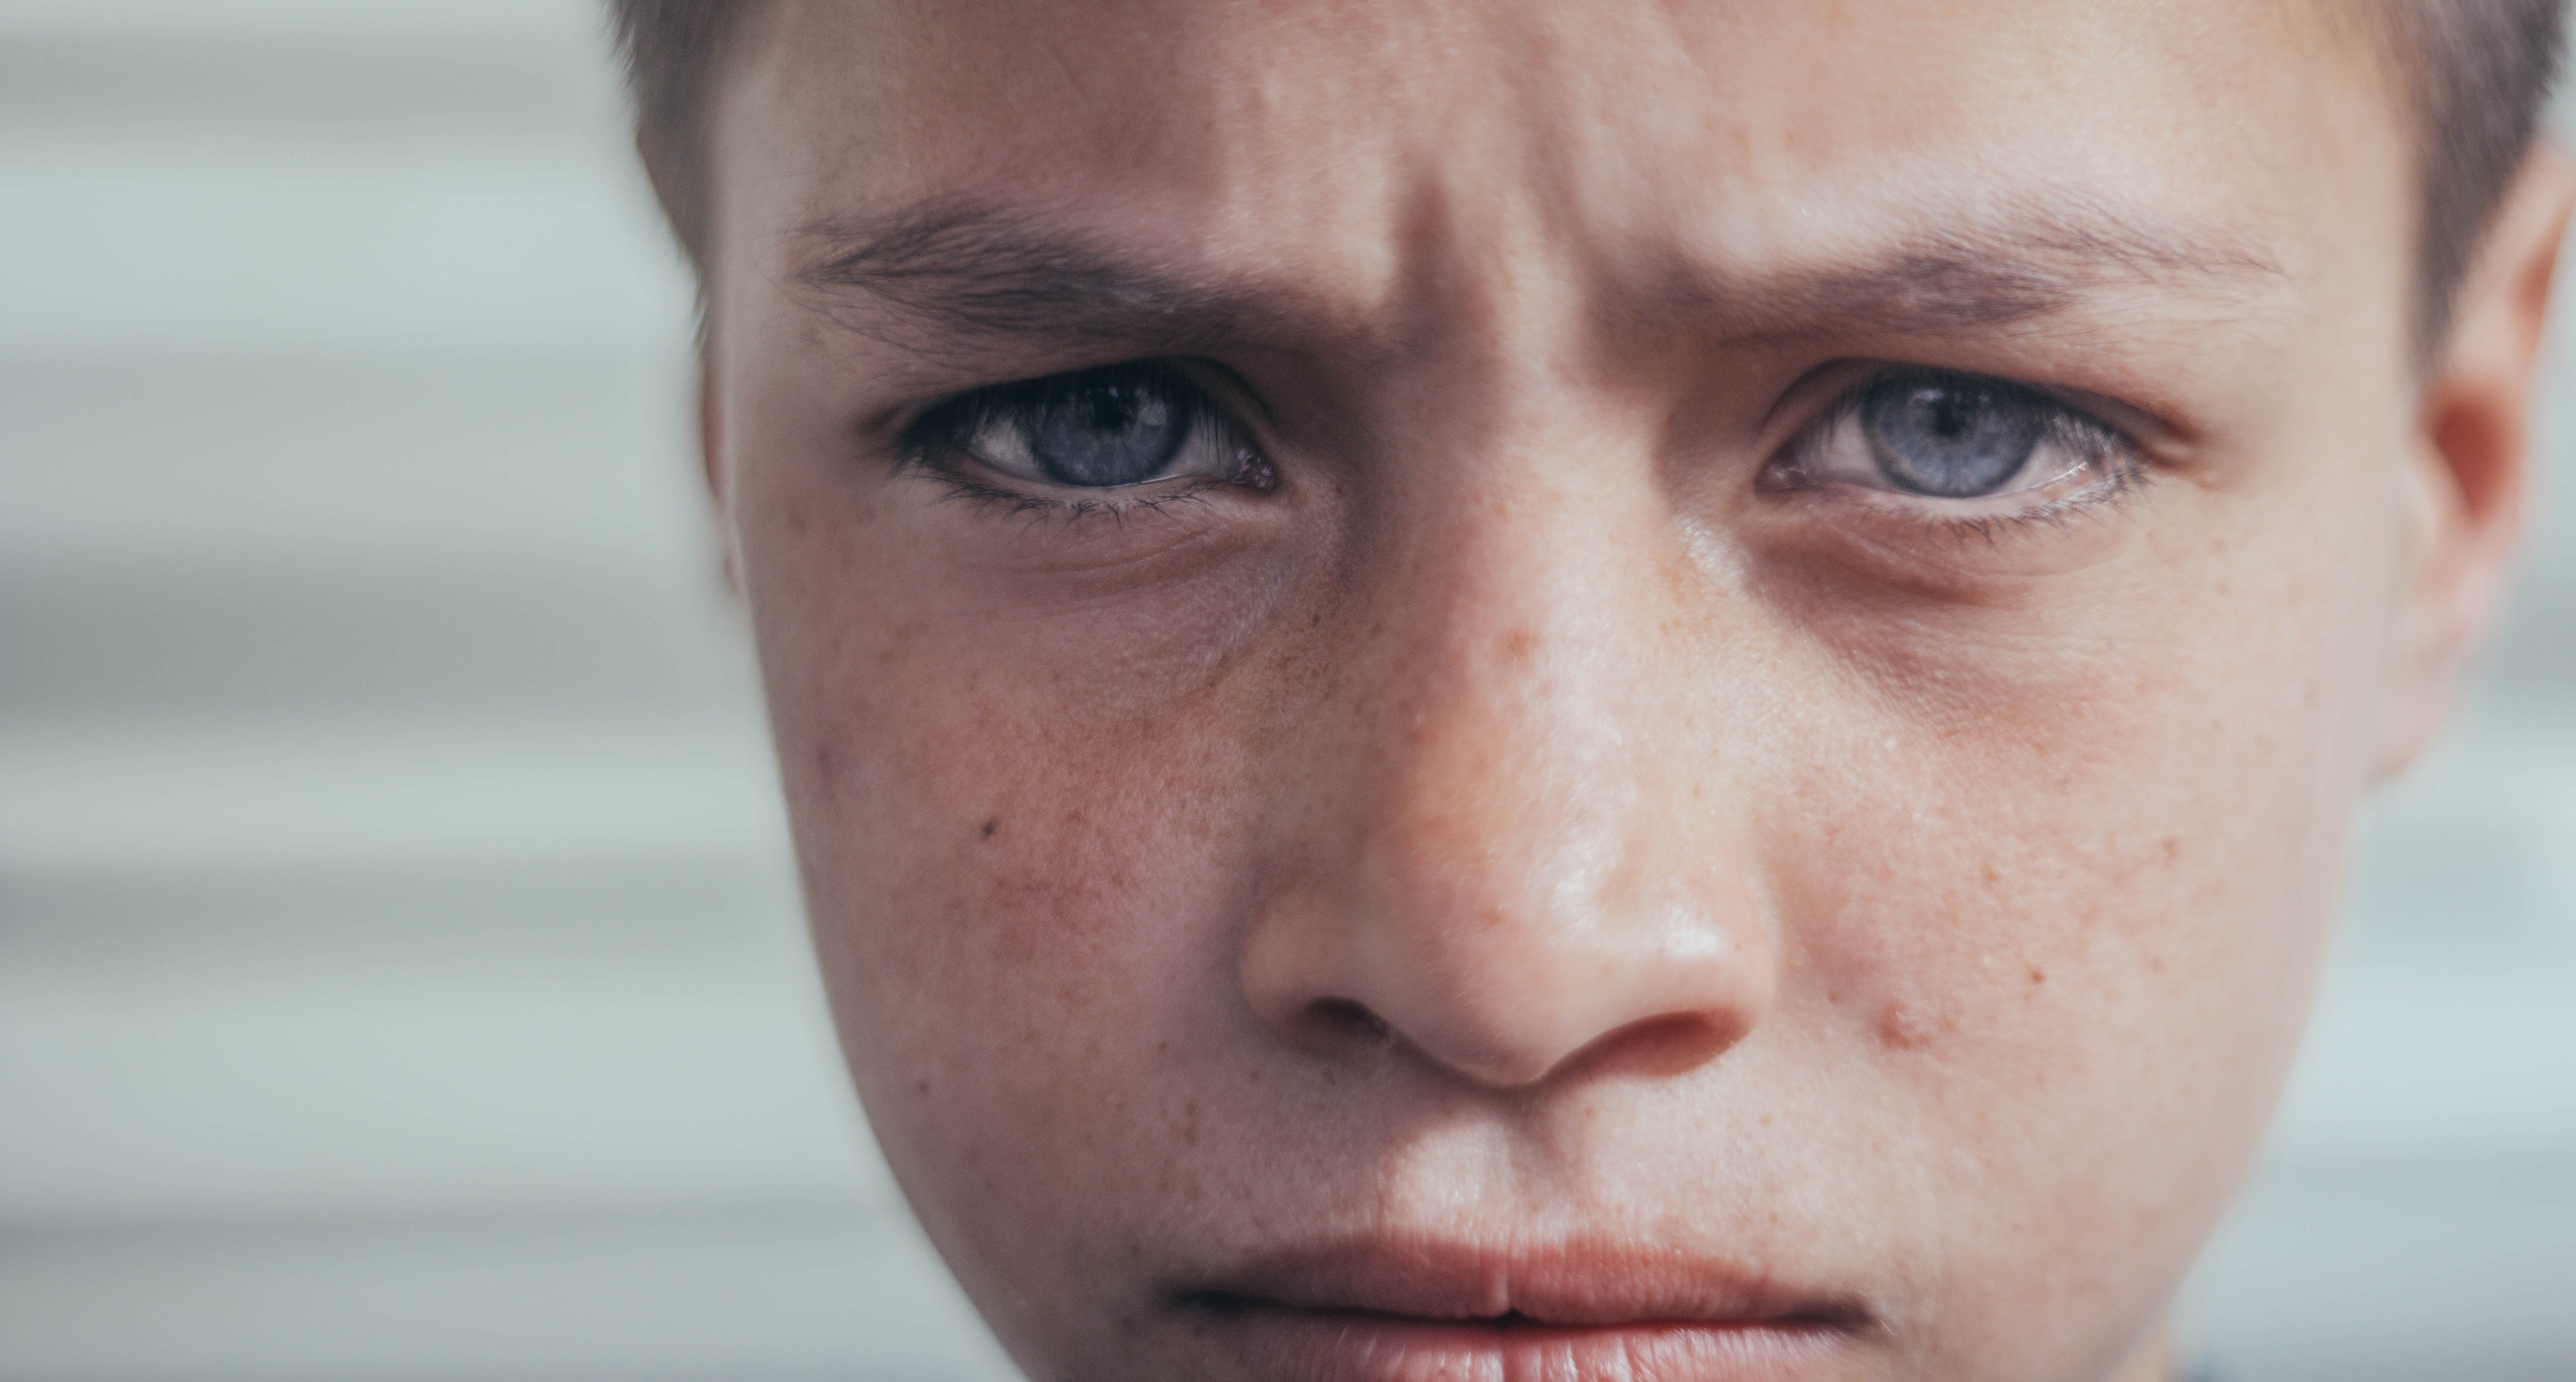 A close-up of an angry boy | Photo: Pexels